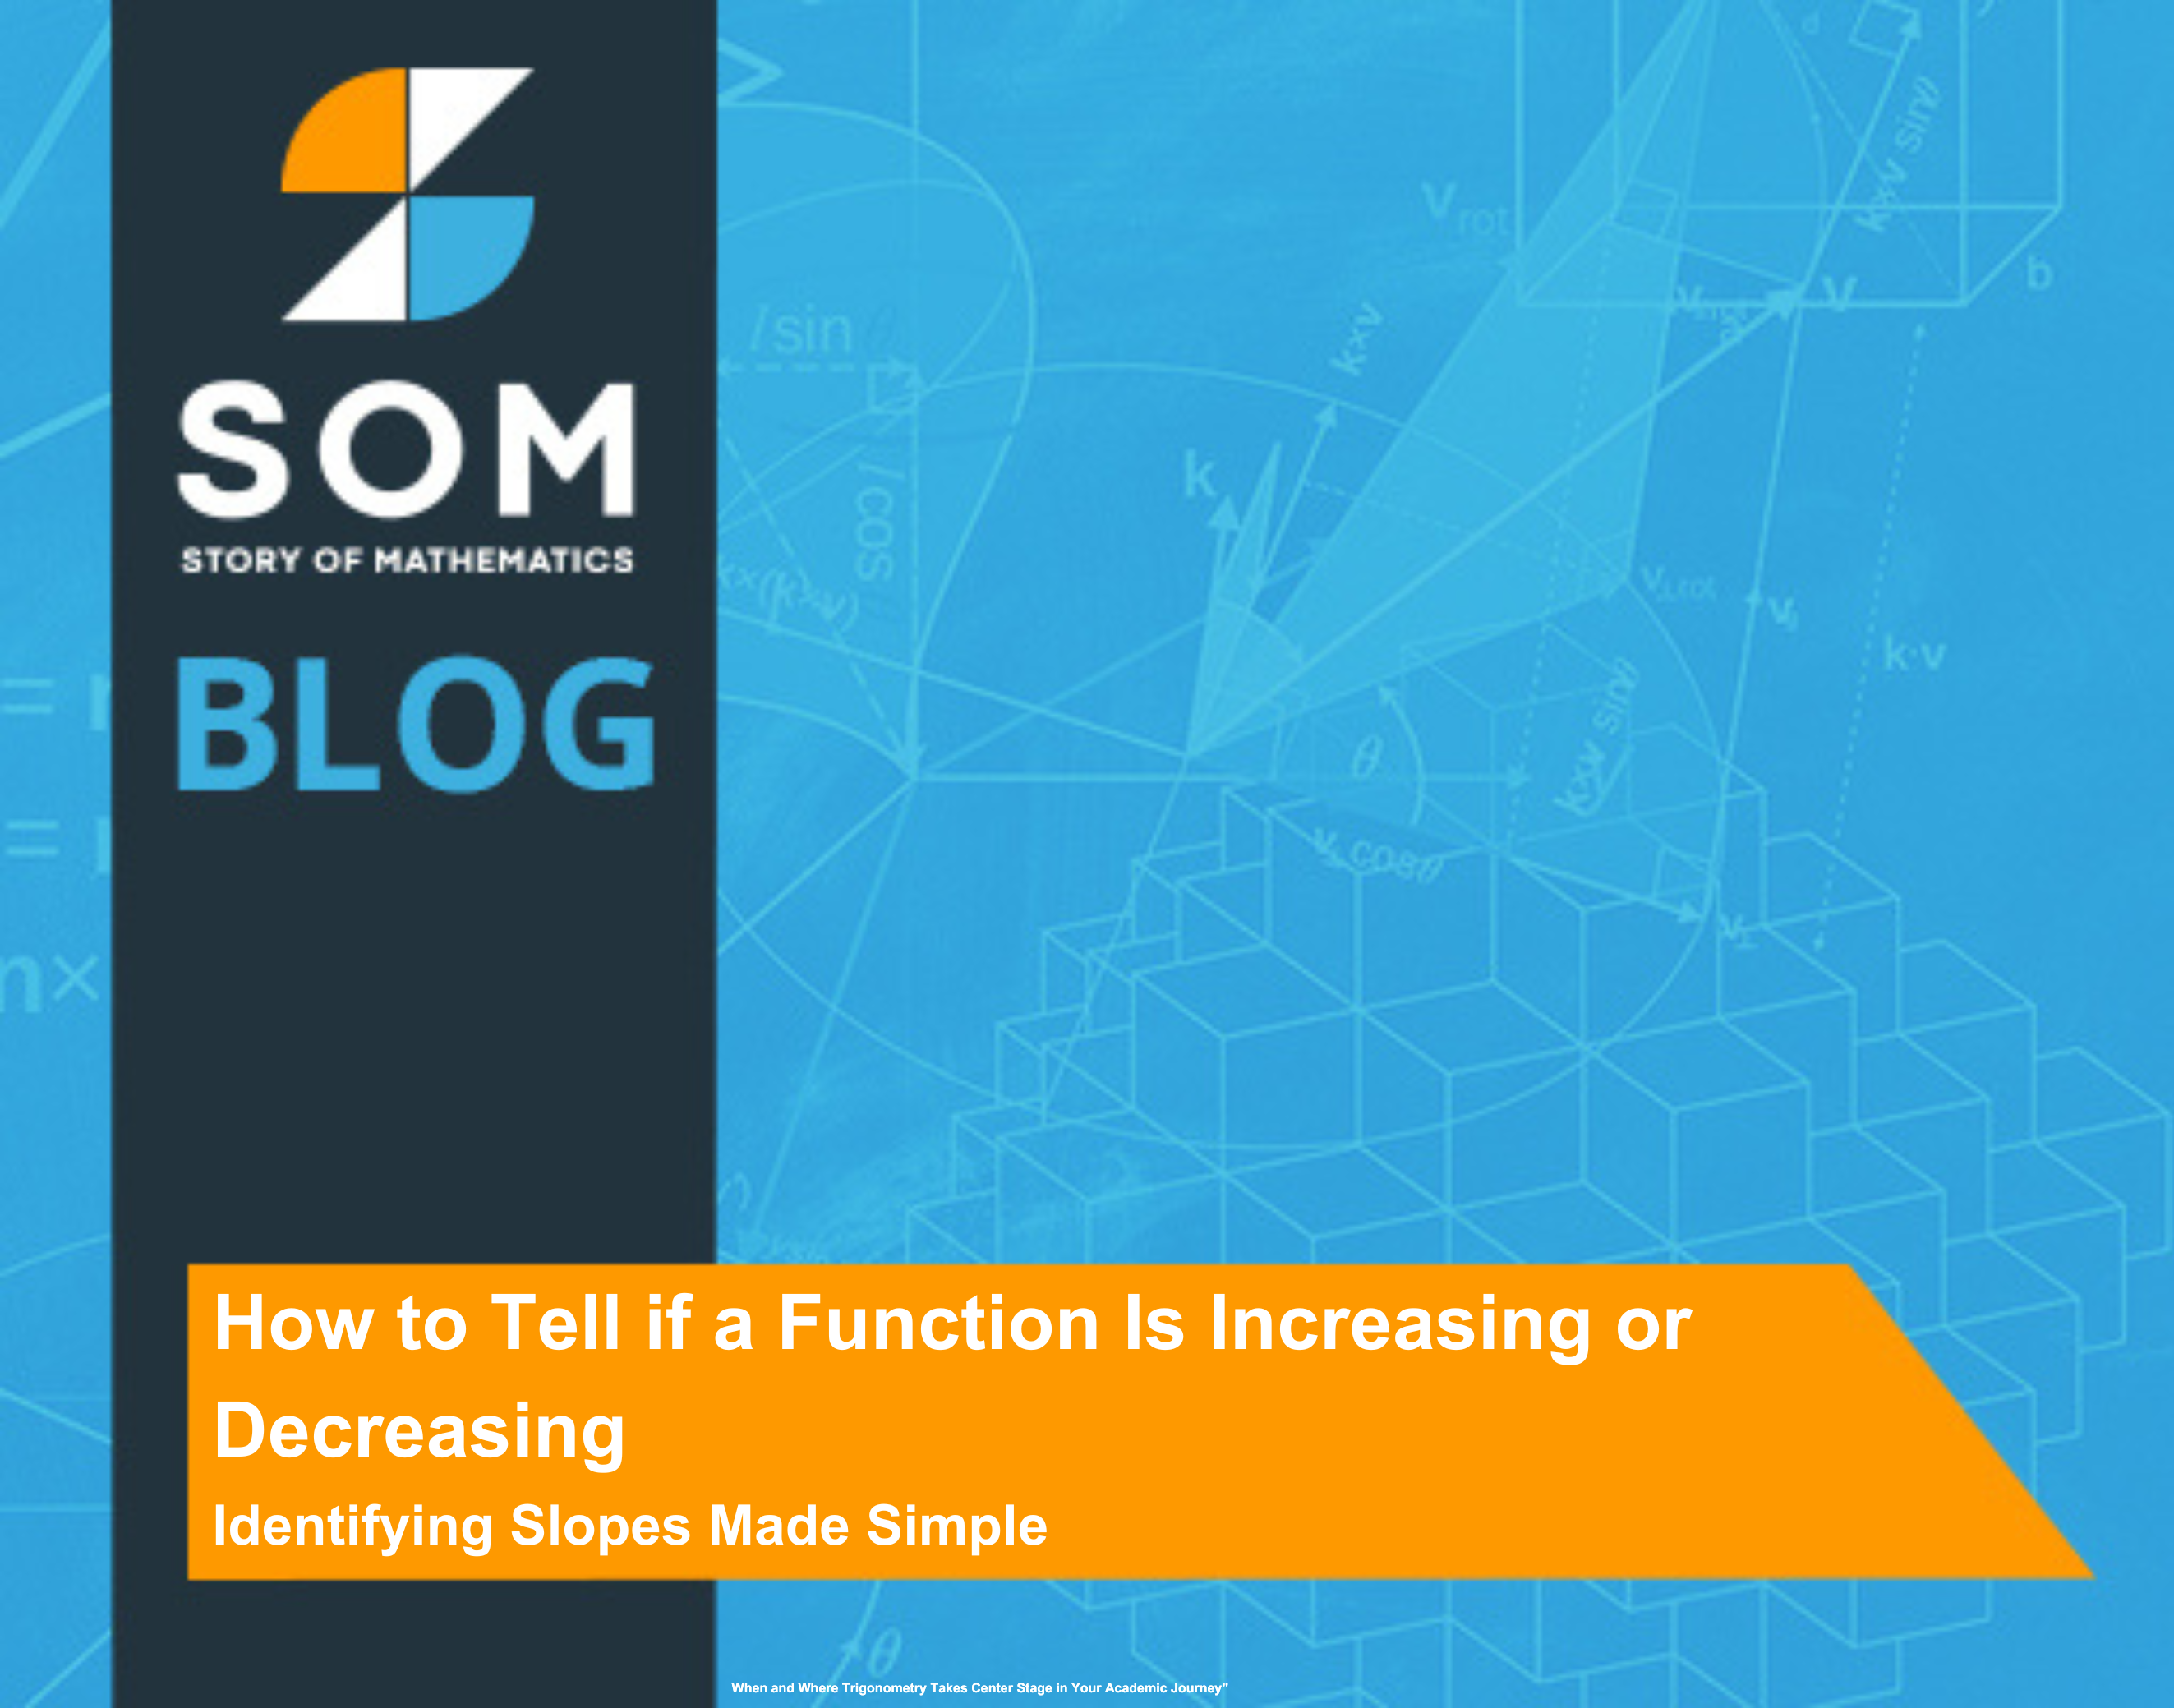 Feature Image How to Tell if a Function Is Increasing or Decreasing Identifying Slopes Made SimpleFeature Image How to Tell if a Function Is Increasing or Decreasing Identifying Slopes Made Simple